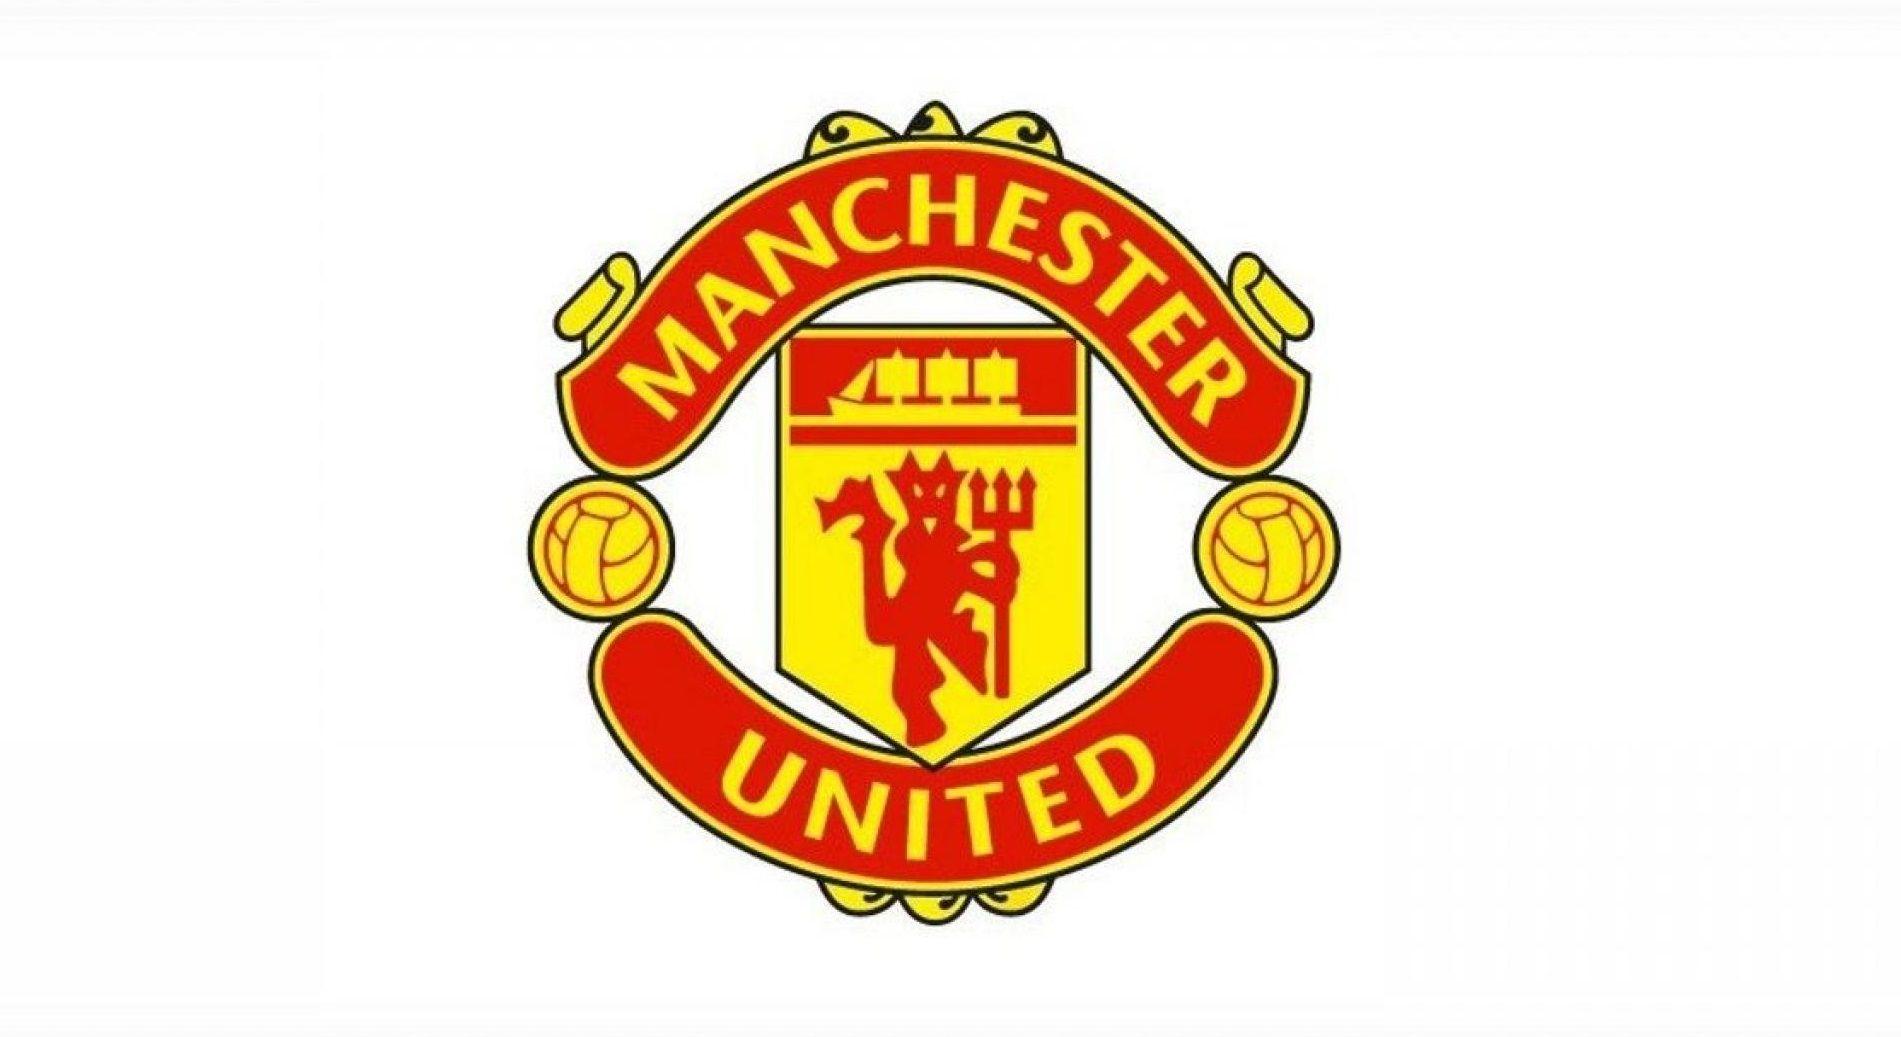 Man U Logo - In pictures: The evolution of Manchester United's crest